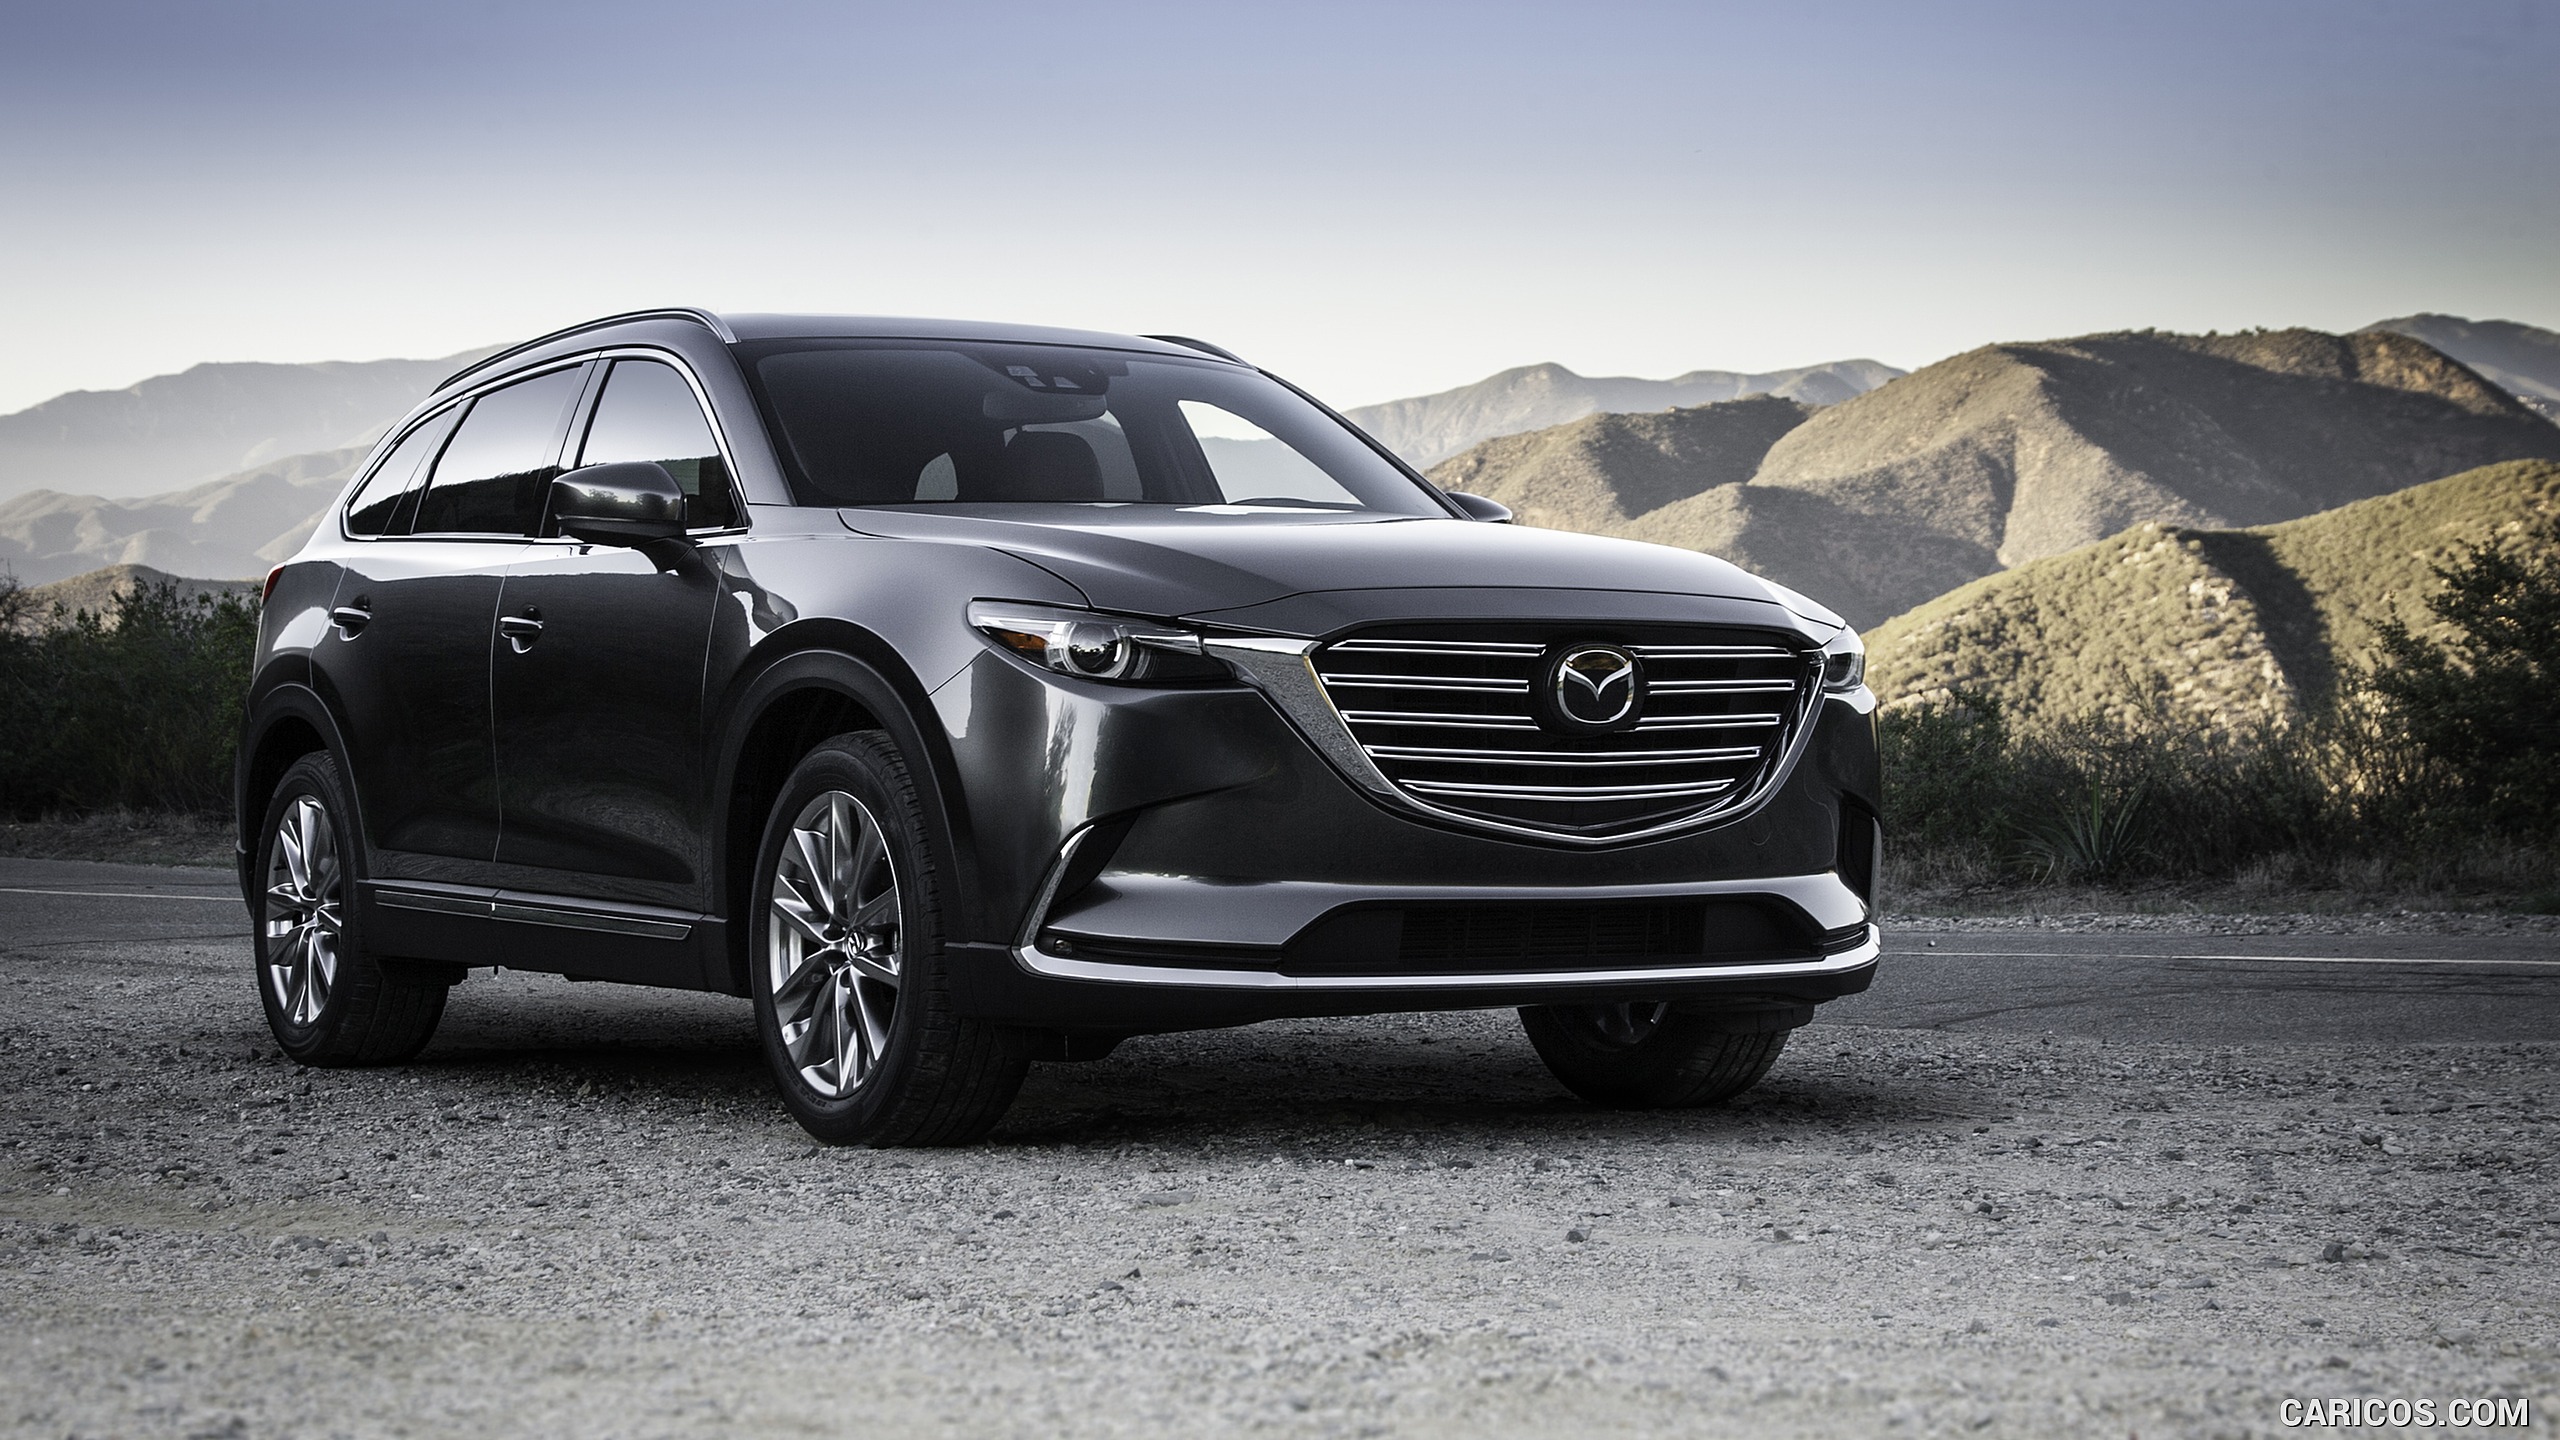 2016 Mazda CX-9 - Front, #2 of 69